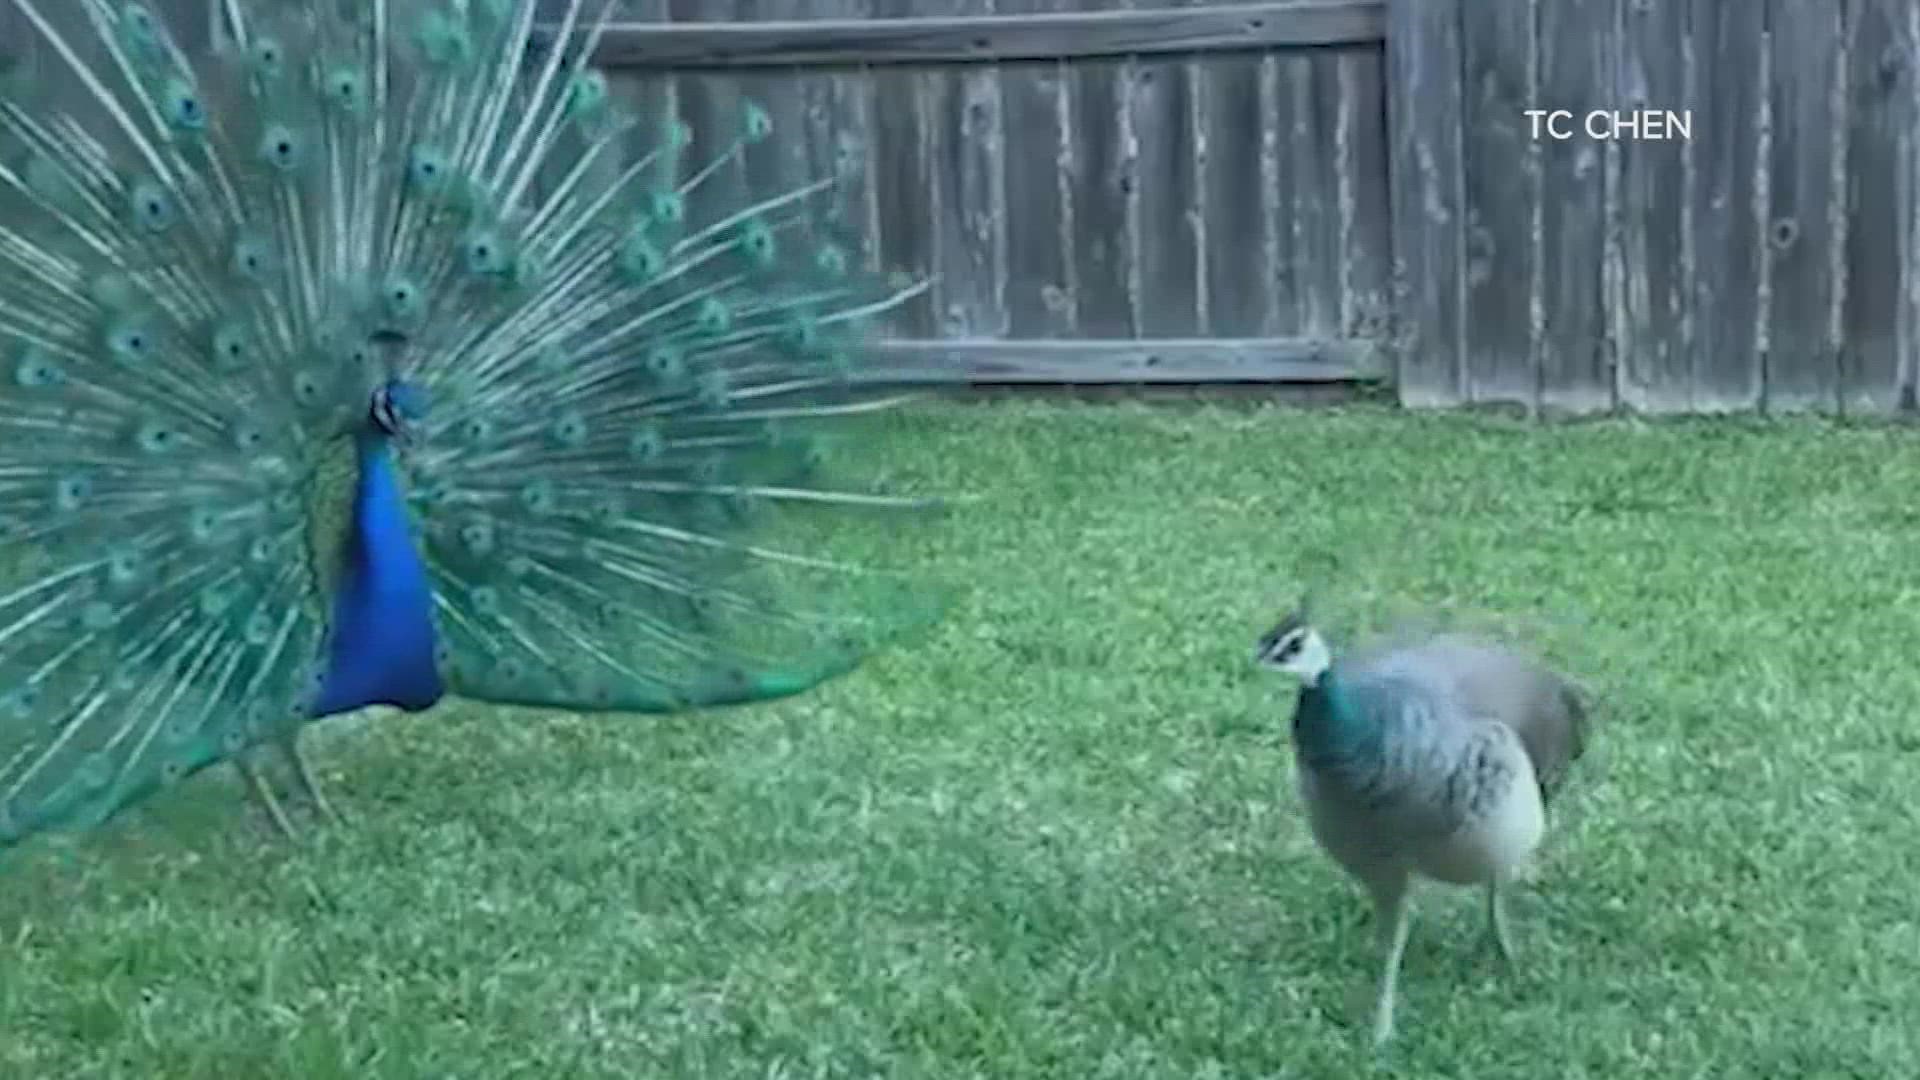 Animal services said catching the pair of peacocks is easier said than done because they fly away every time they have tried.